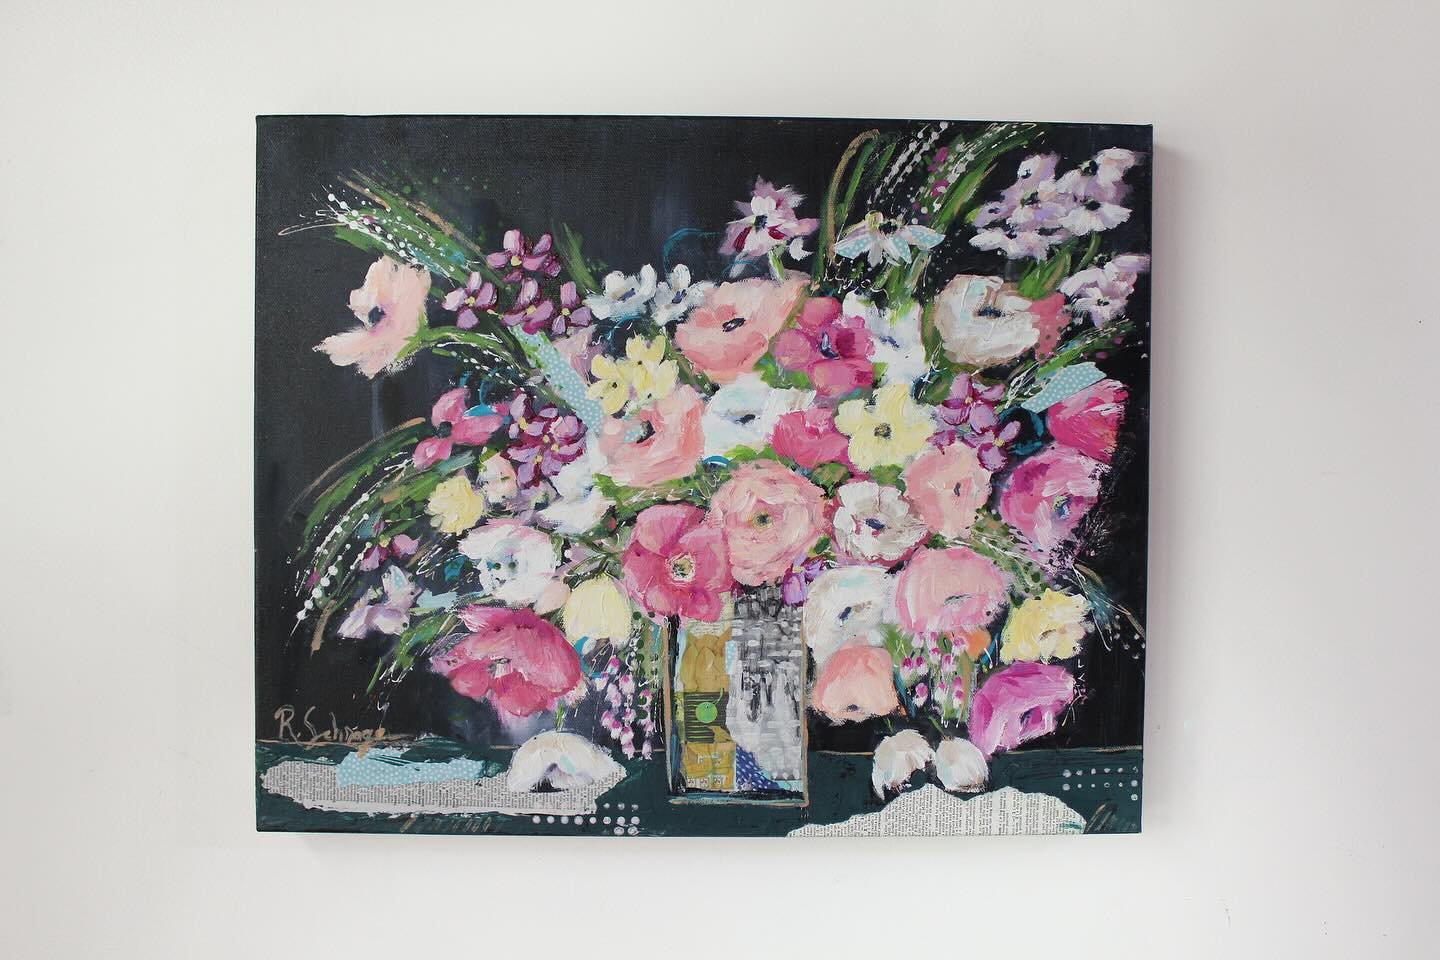 Having fun with more collage elements with the new floral collection. I am wrapping up the final painting today and will have them available online on 4/23. 

If you&rsquo;re in the Nashville area I&rsquo;ll be bringing all the new florals to Frankli